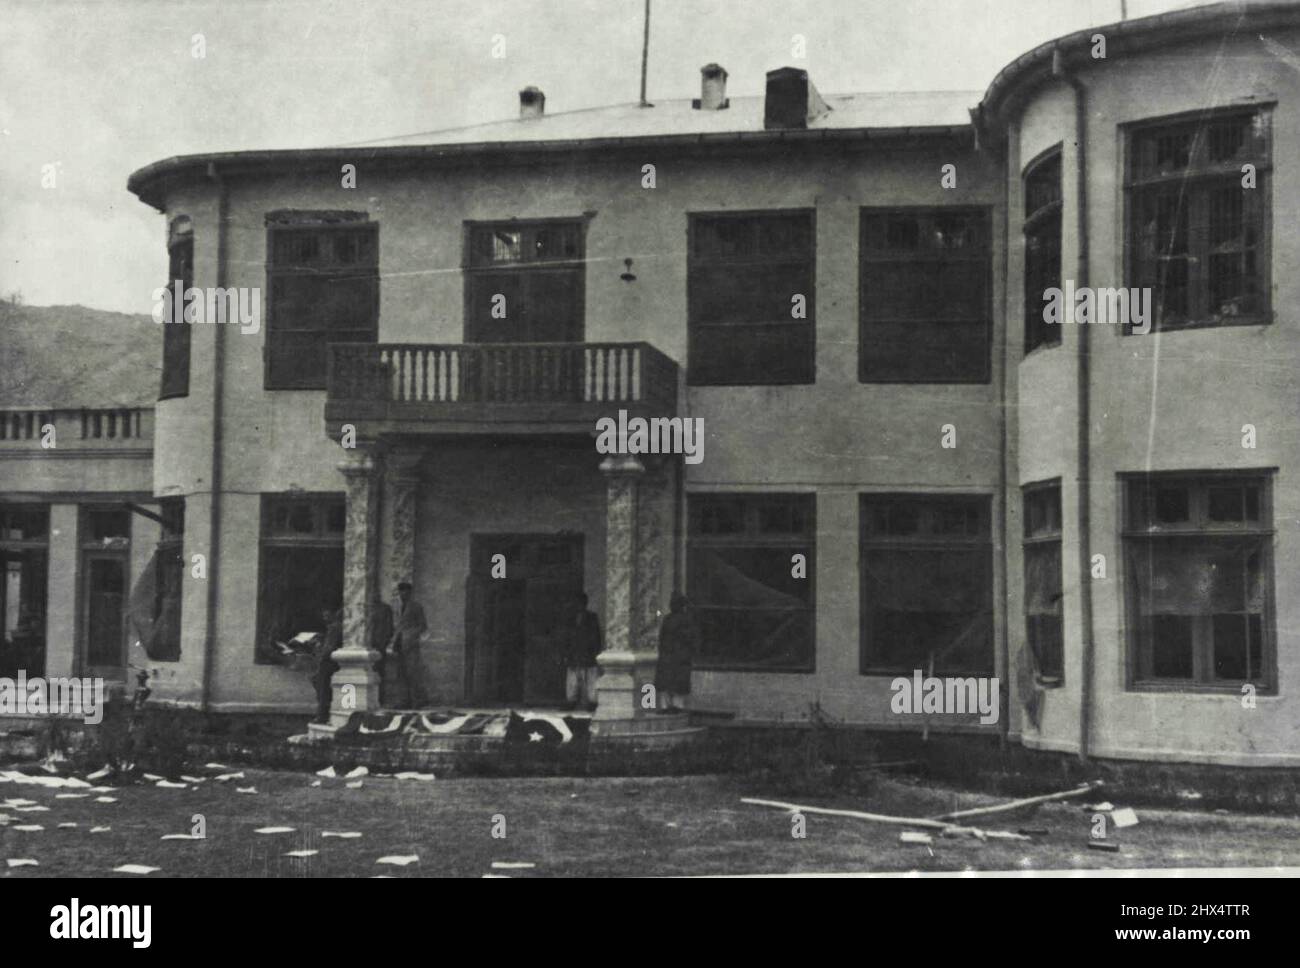 The Embassy of Pakistan and Pakistan Ambassador's residence in Kabul was raided and looted on March 30th. The Pakistan flag which was forcibly removed by the officially organized mob. The flag can be seen on the porch. June 6, 1955. Stock Photo